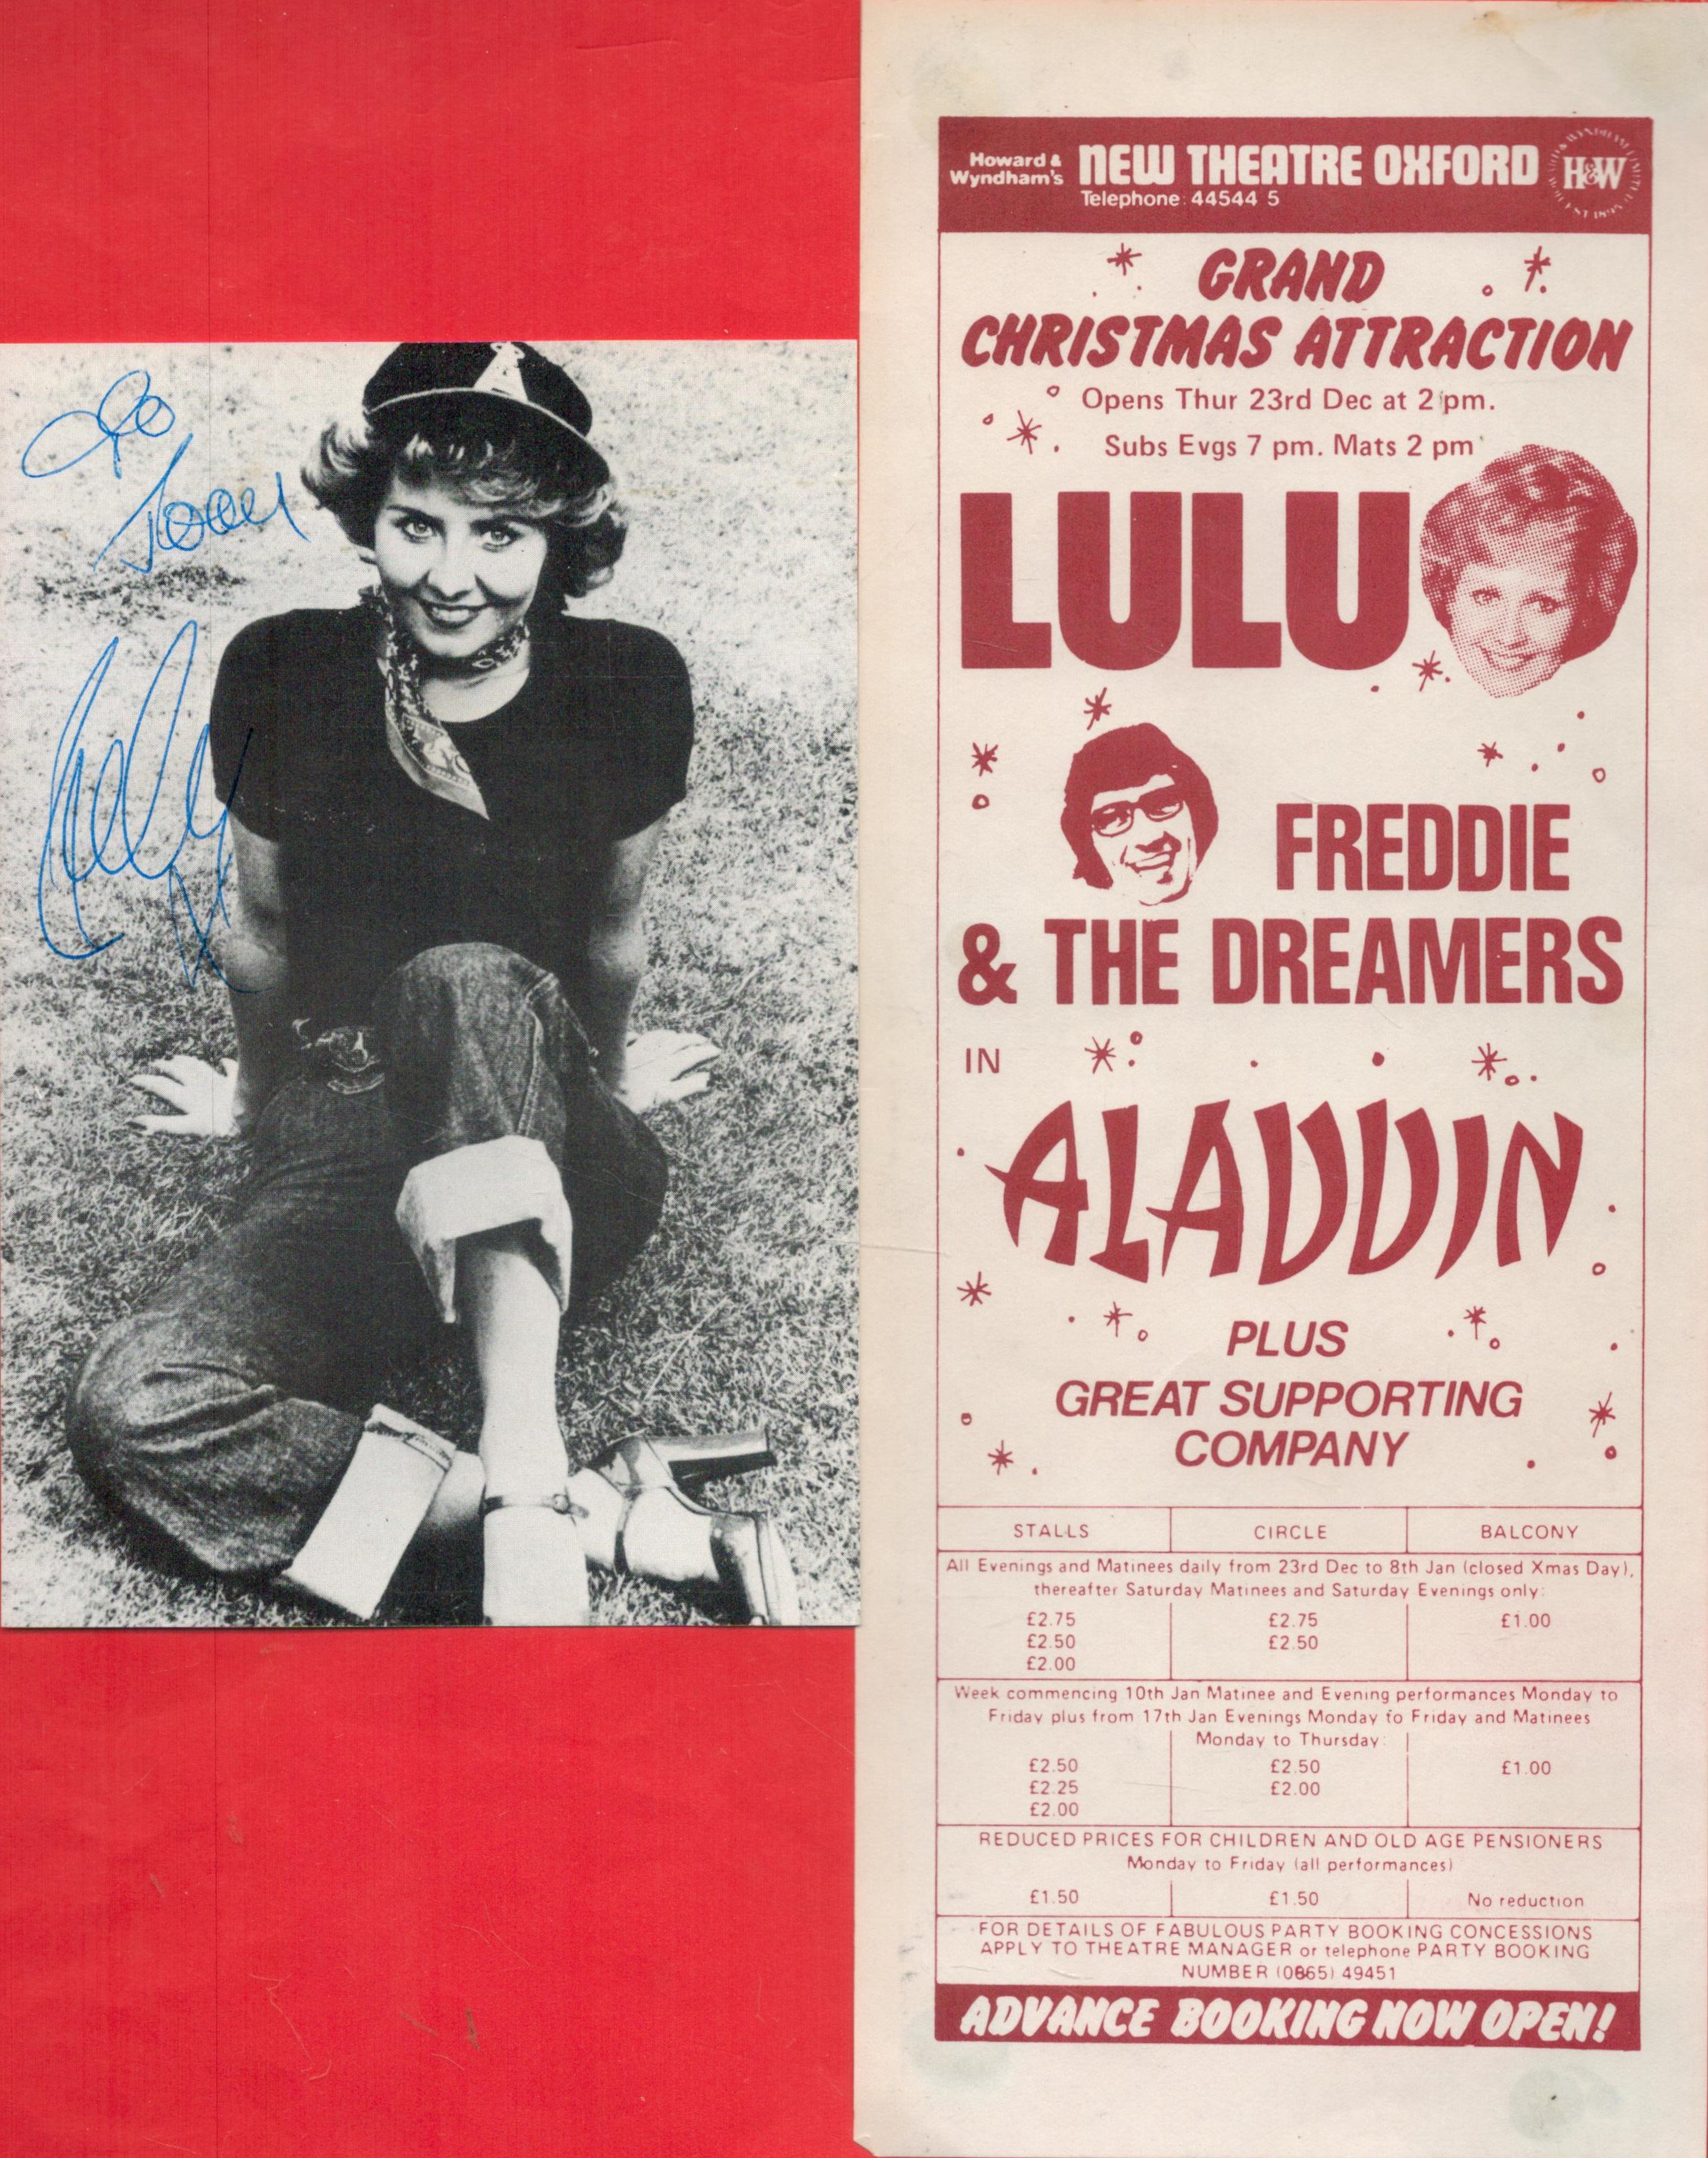 Lulu Signed 6x4 inch Black and White Personalised Promo Card With Theatre Programme Starring Lulu.